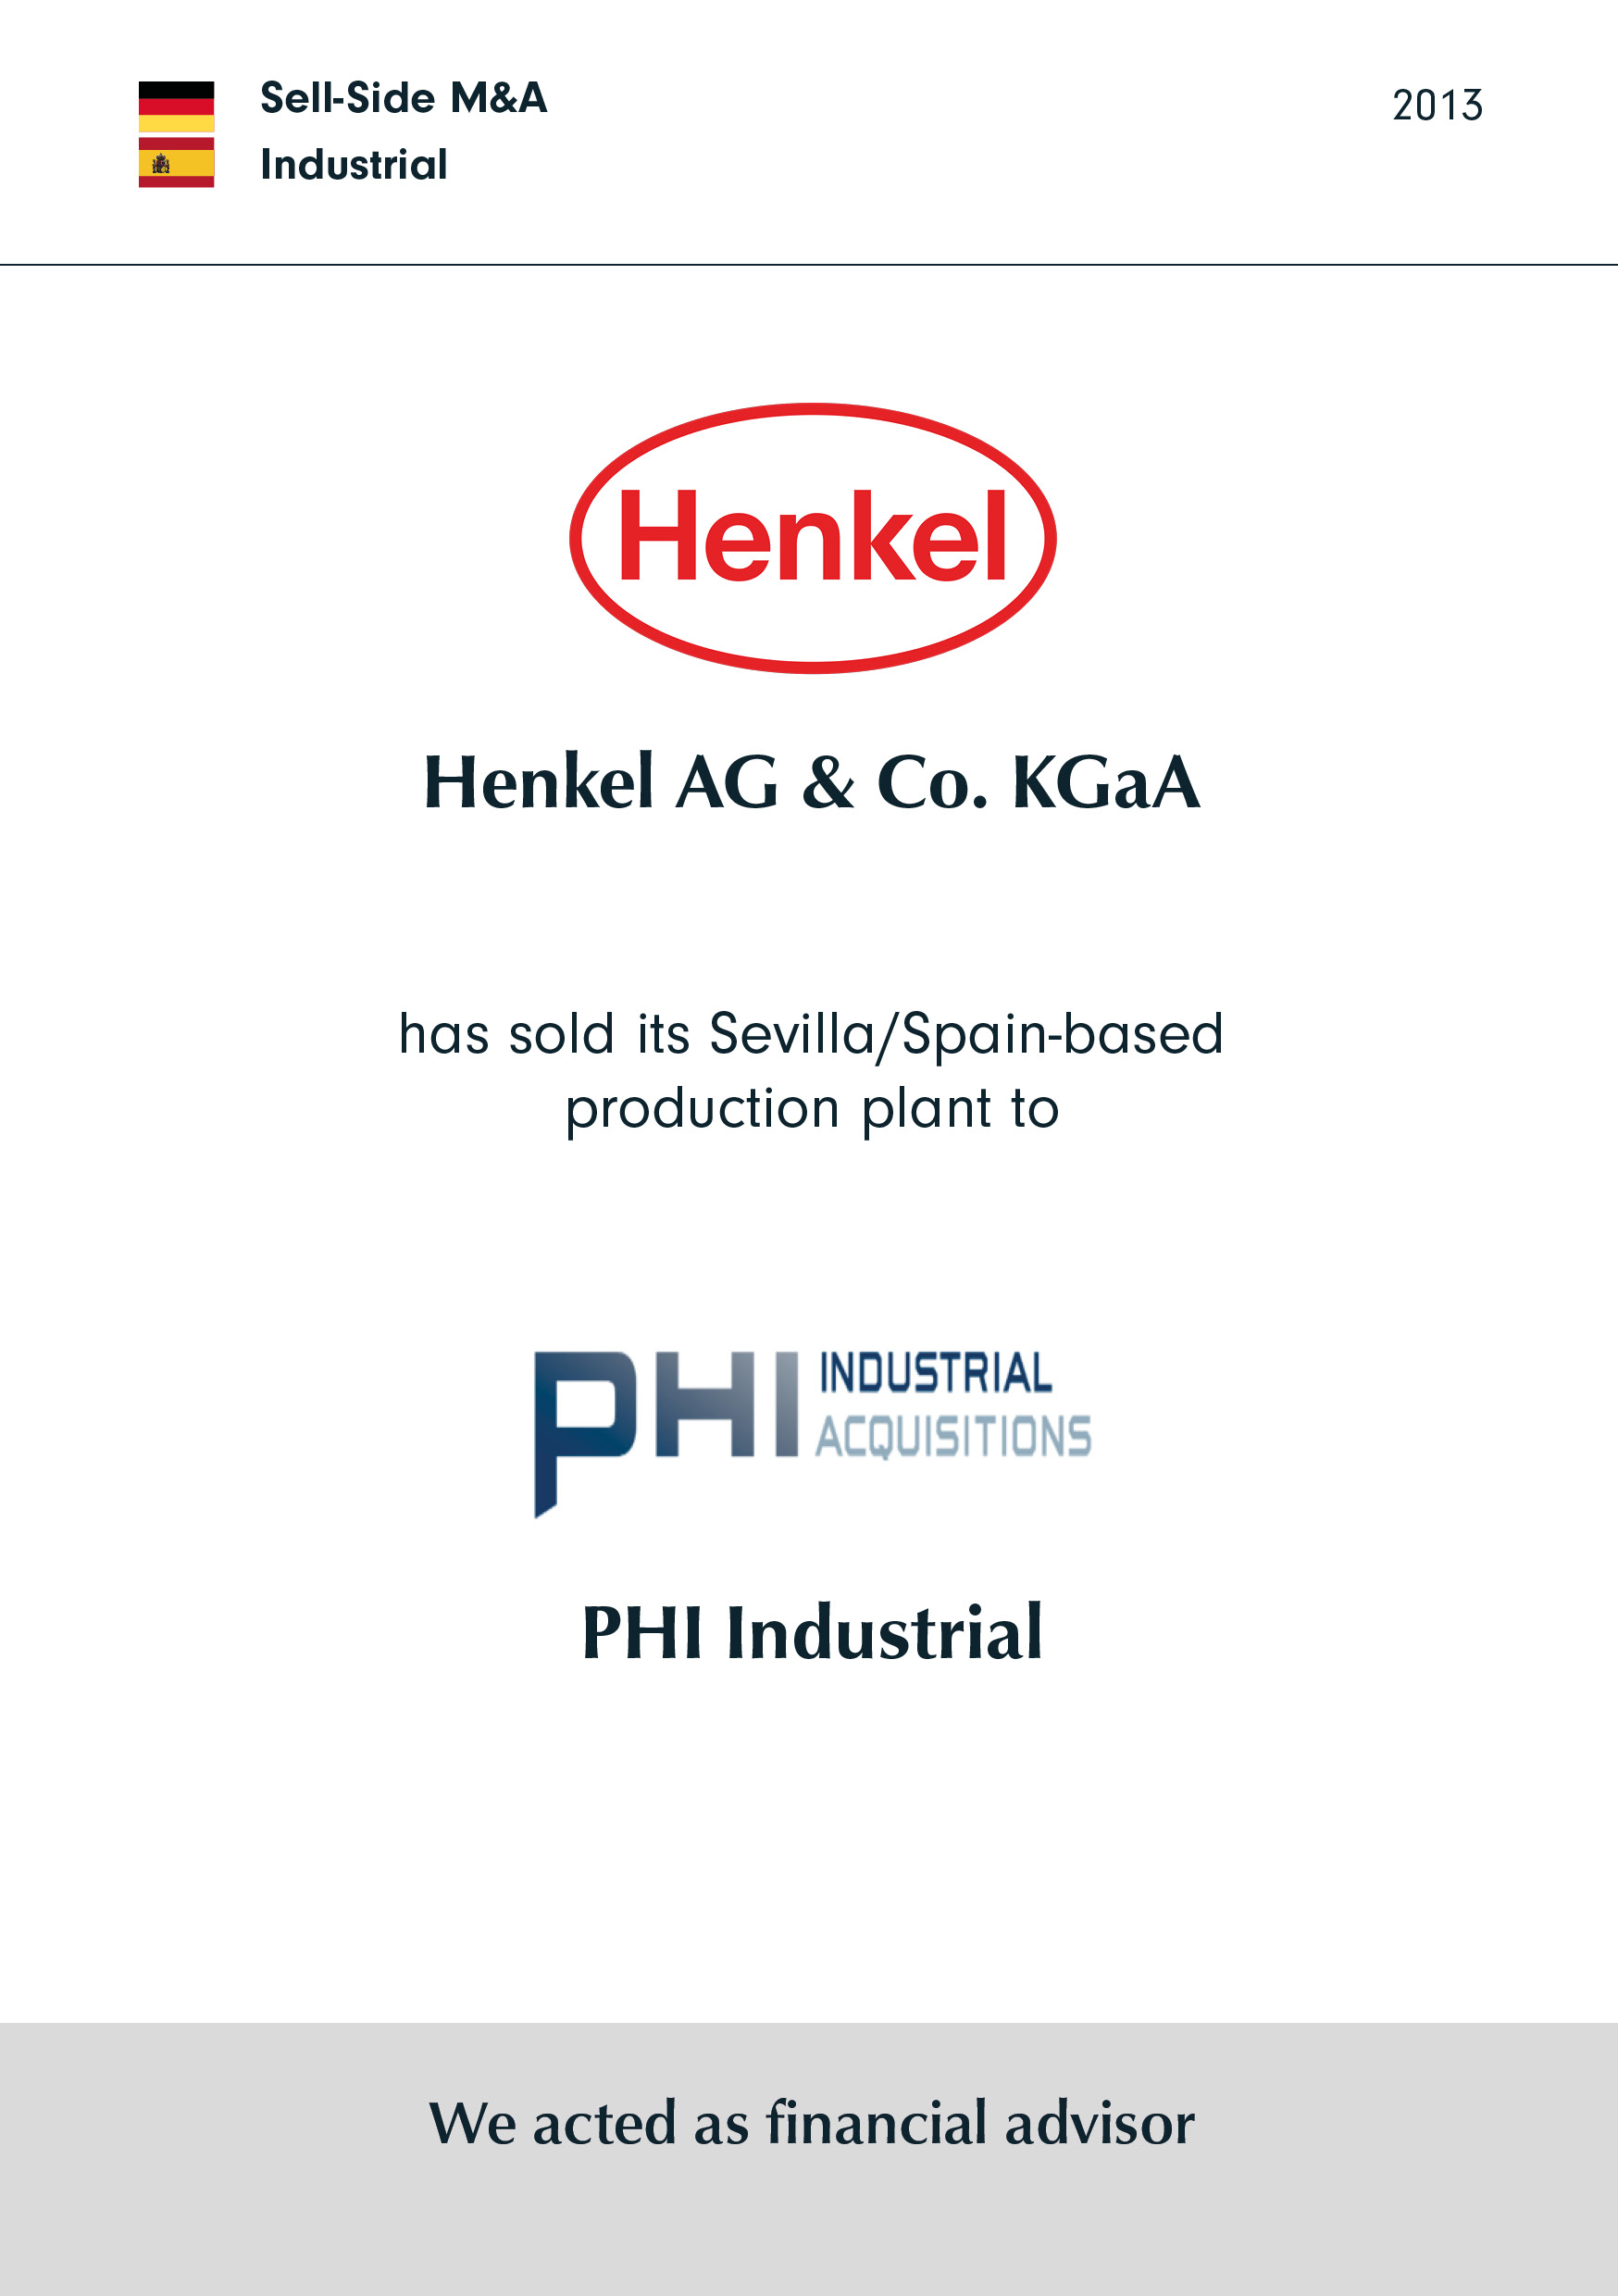 Henkel has sold its Sevilla/Spain-based production plant to PHI